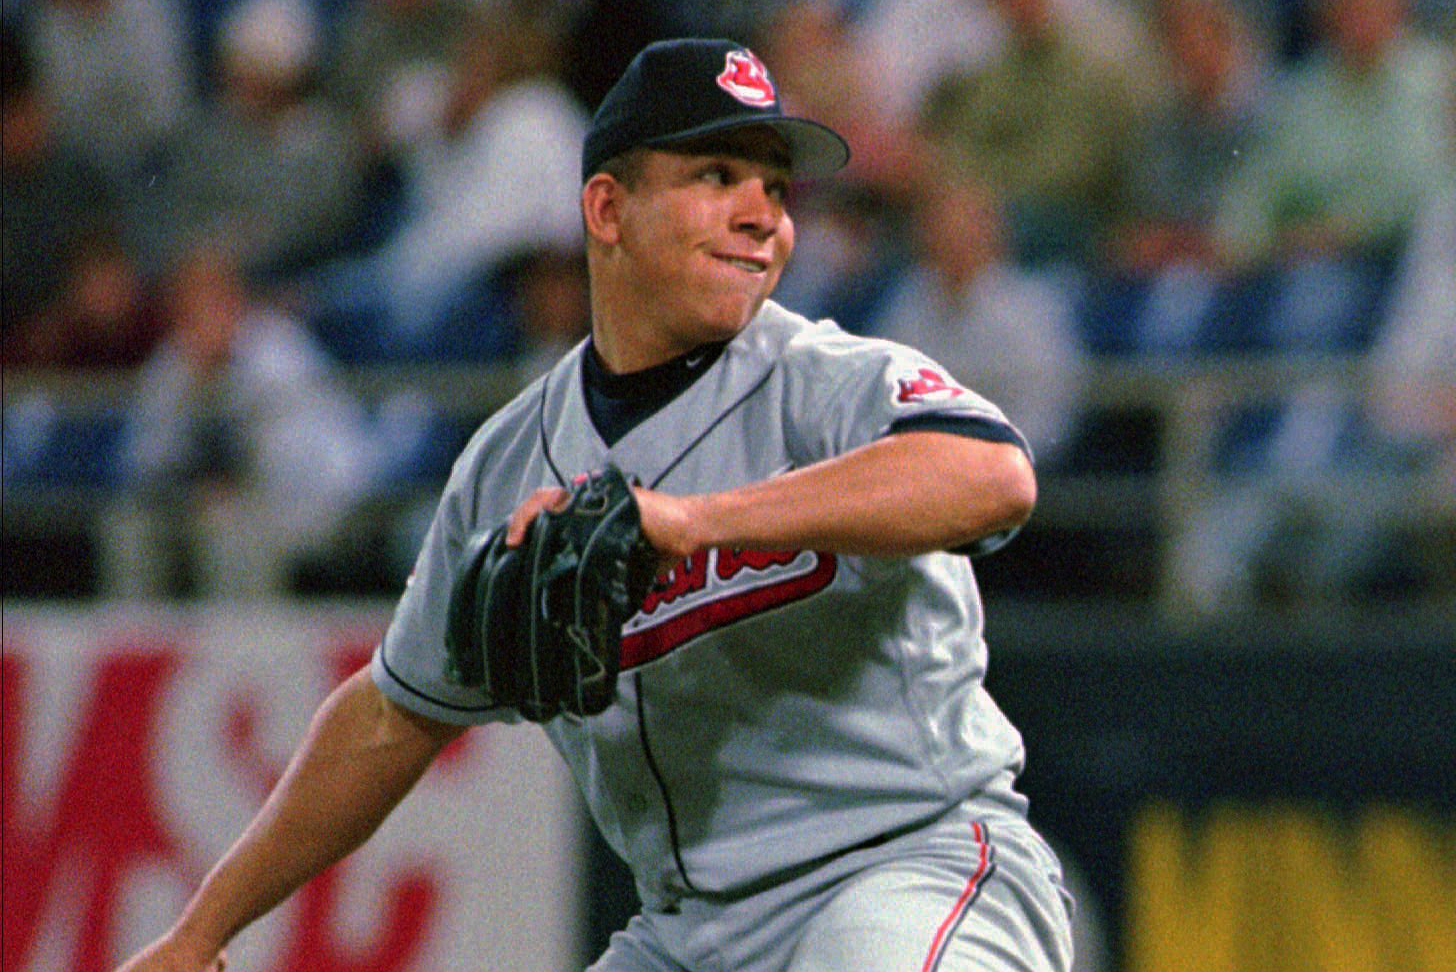 File:Bartolo Colón pitching on Old-Timers' Day, Aug 27 2022 3.jpg -  Wikipedia